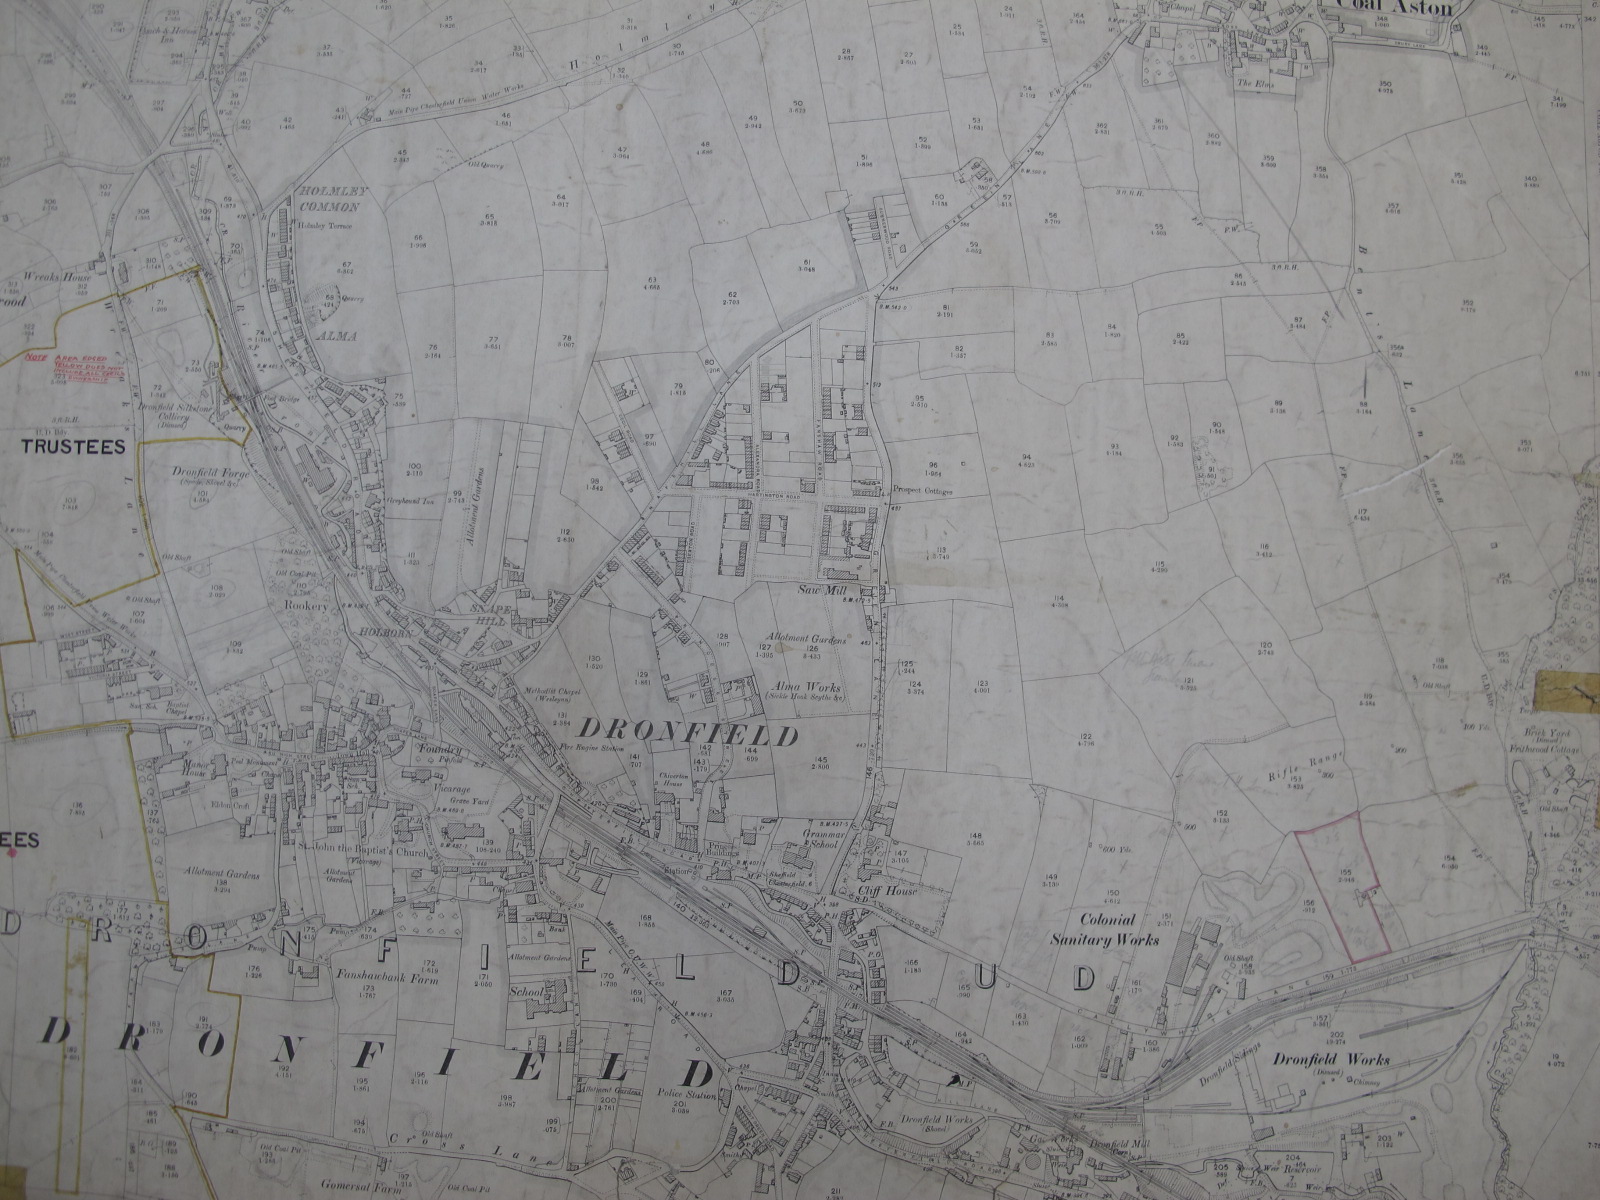 Derbyshire Maps, to include Eckington, Renishaw, Coal Aston, Scarsdale, Dronfield, Dronfield - Image 11 of 11